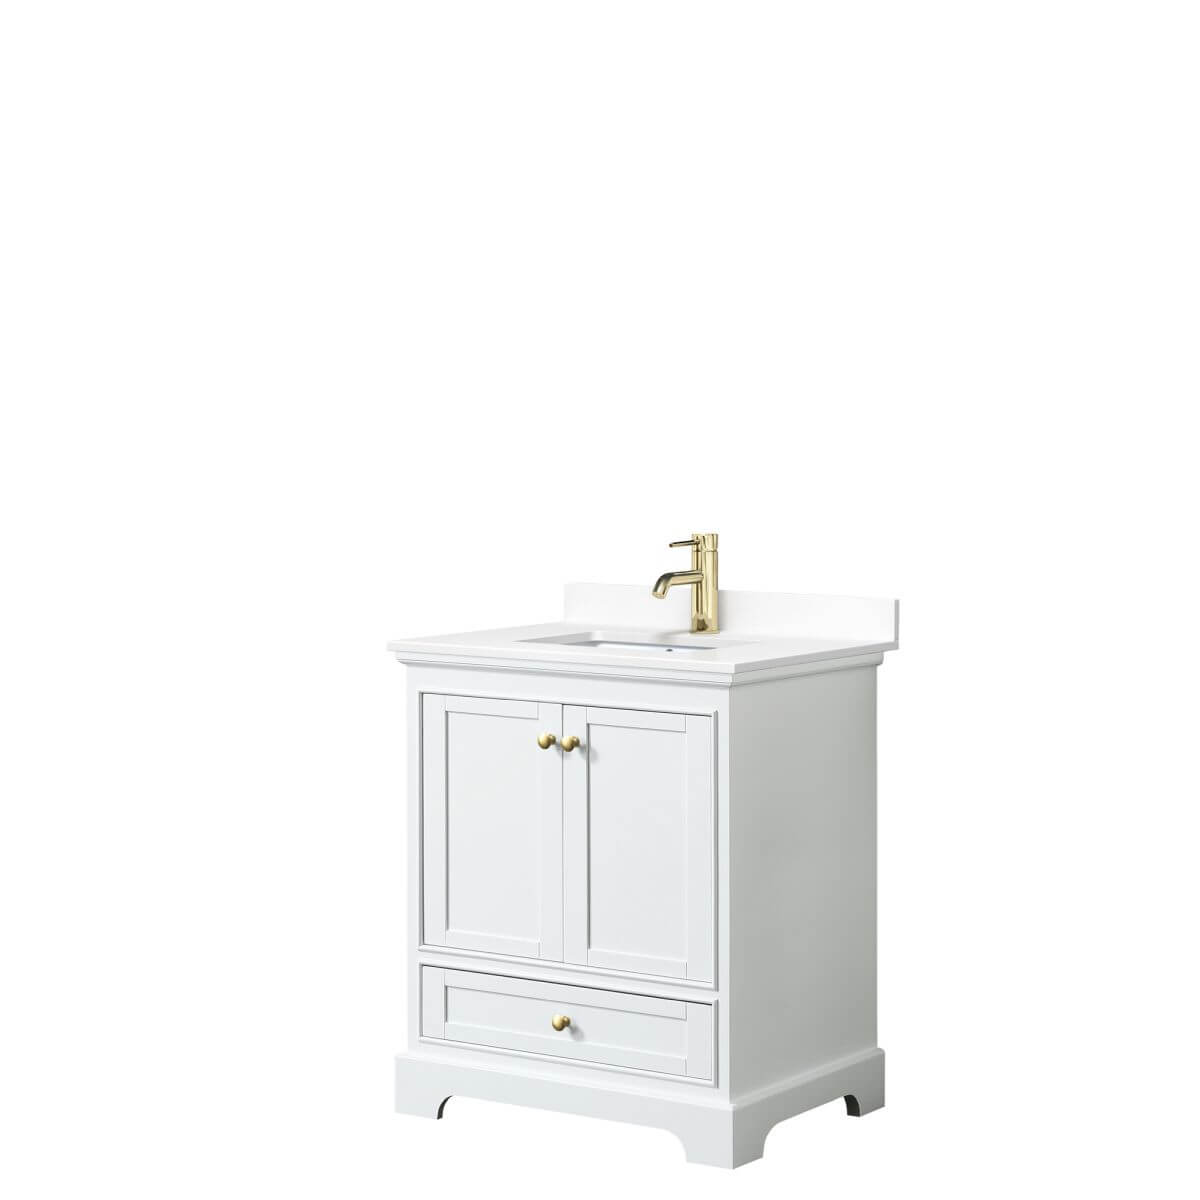 Wyndham Collection Deborah 30 inch Single Bathroom Vanity in White with White Cultured Marble Countertop, Undermount Square Sink, Brushed Gold Trim and No Mirror - WCS202030SWGWCUNSMXX